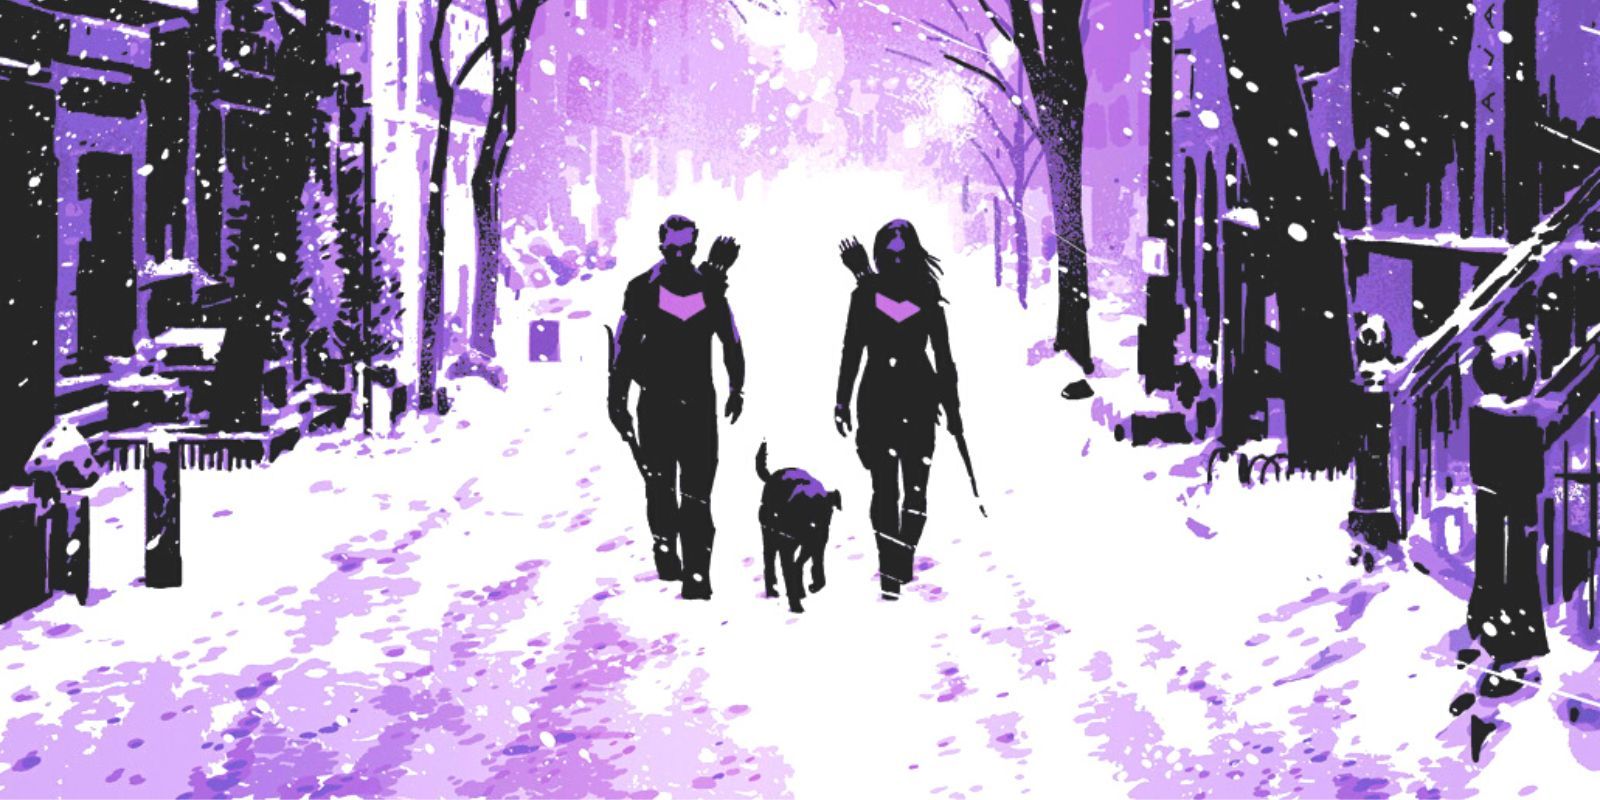 David Aja's art of Clint Barton and Kate Bishop walking down a snowy street in New York